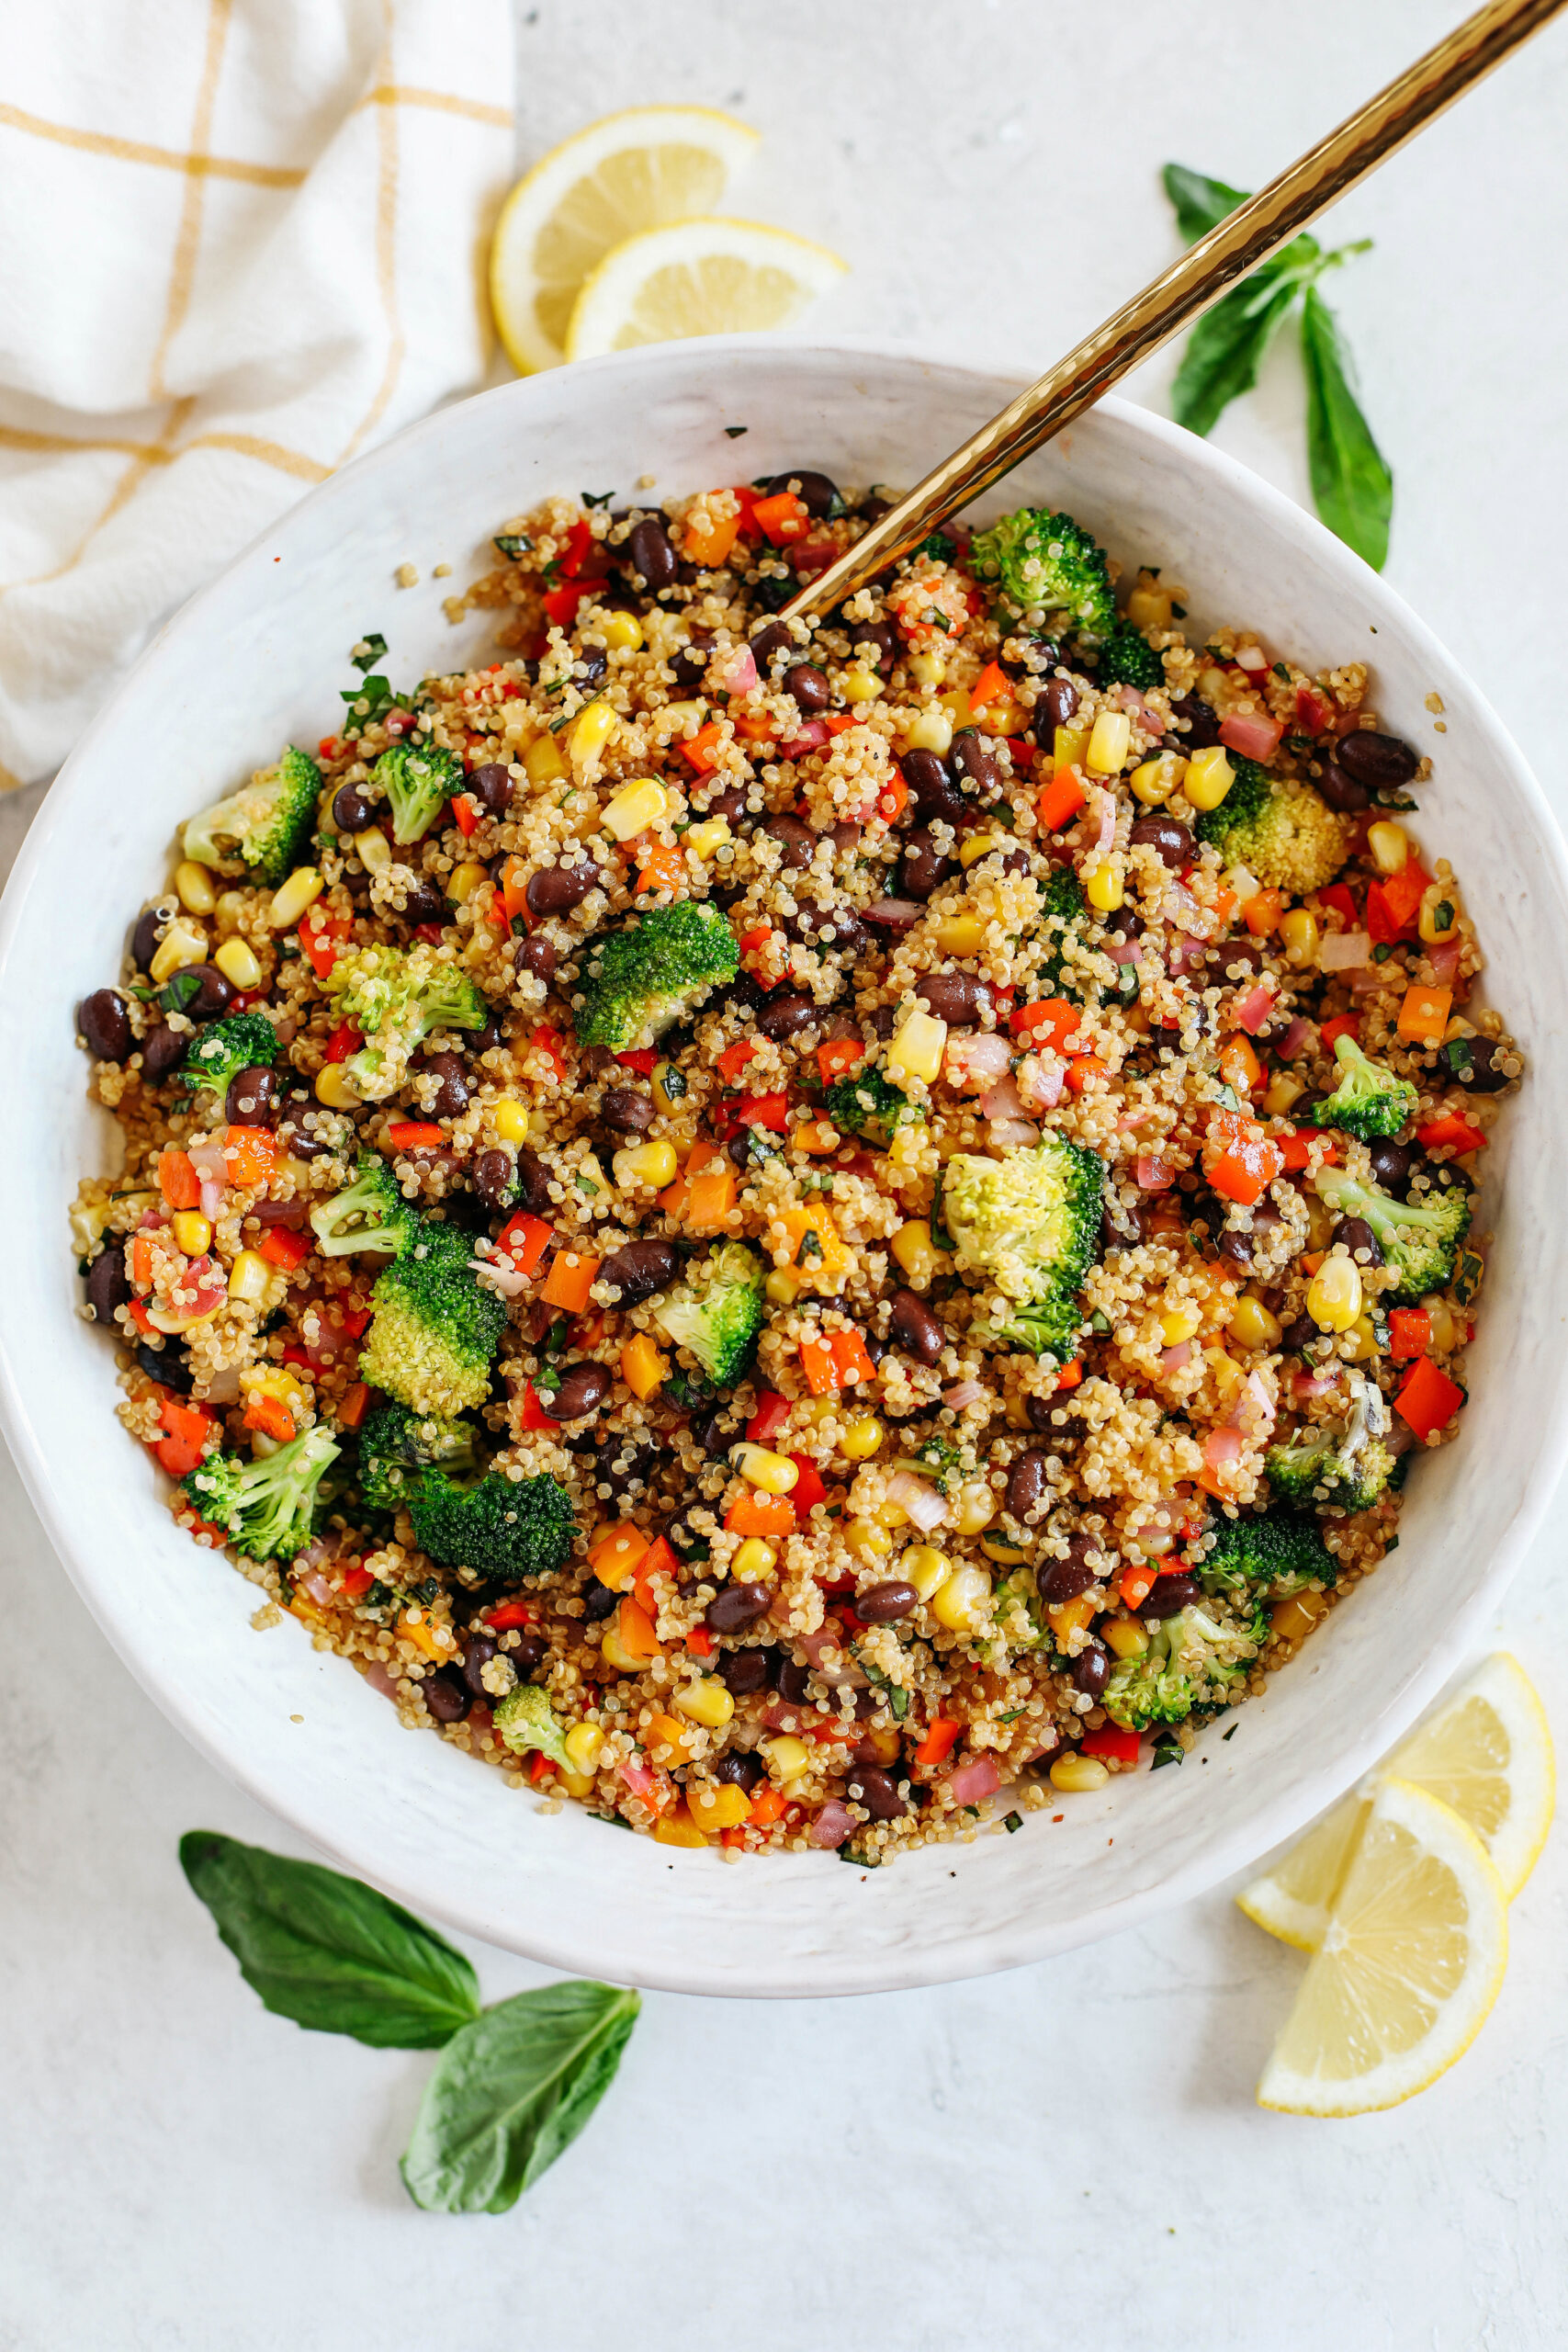 The perfect Summer Quinoa Salad made with a delicious combination of sautéed veggies, black beans, corn, and fresh basil all tossed with a lemon balsamic dressing!